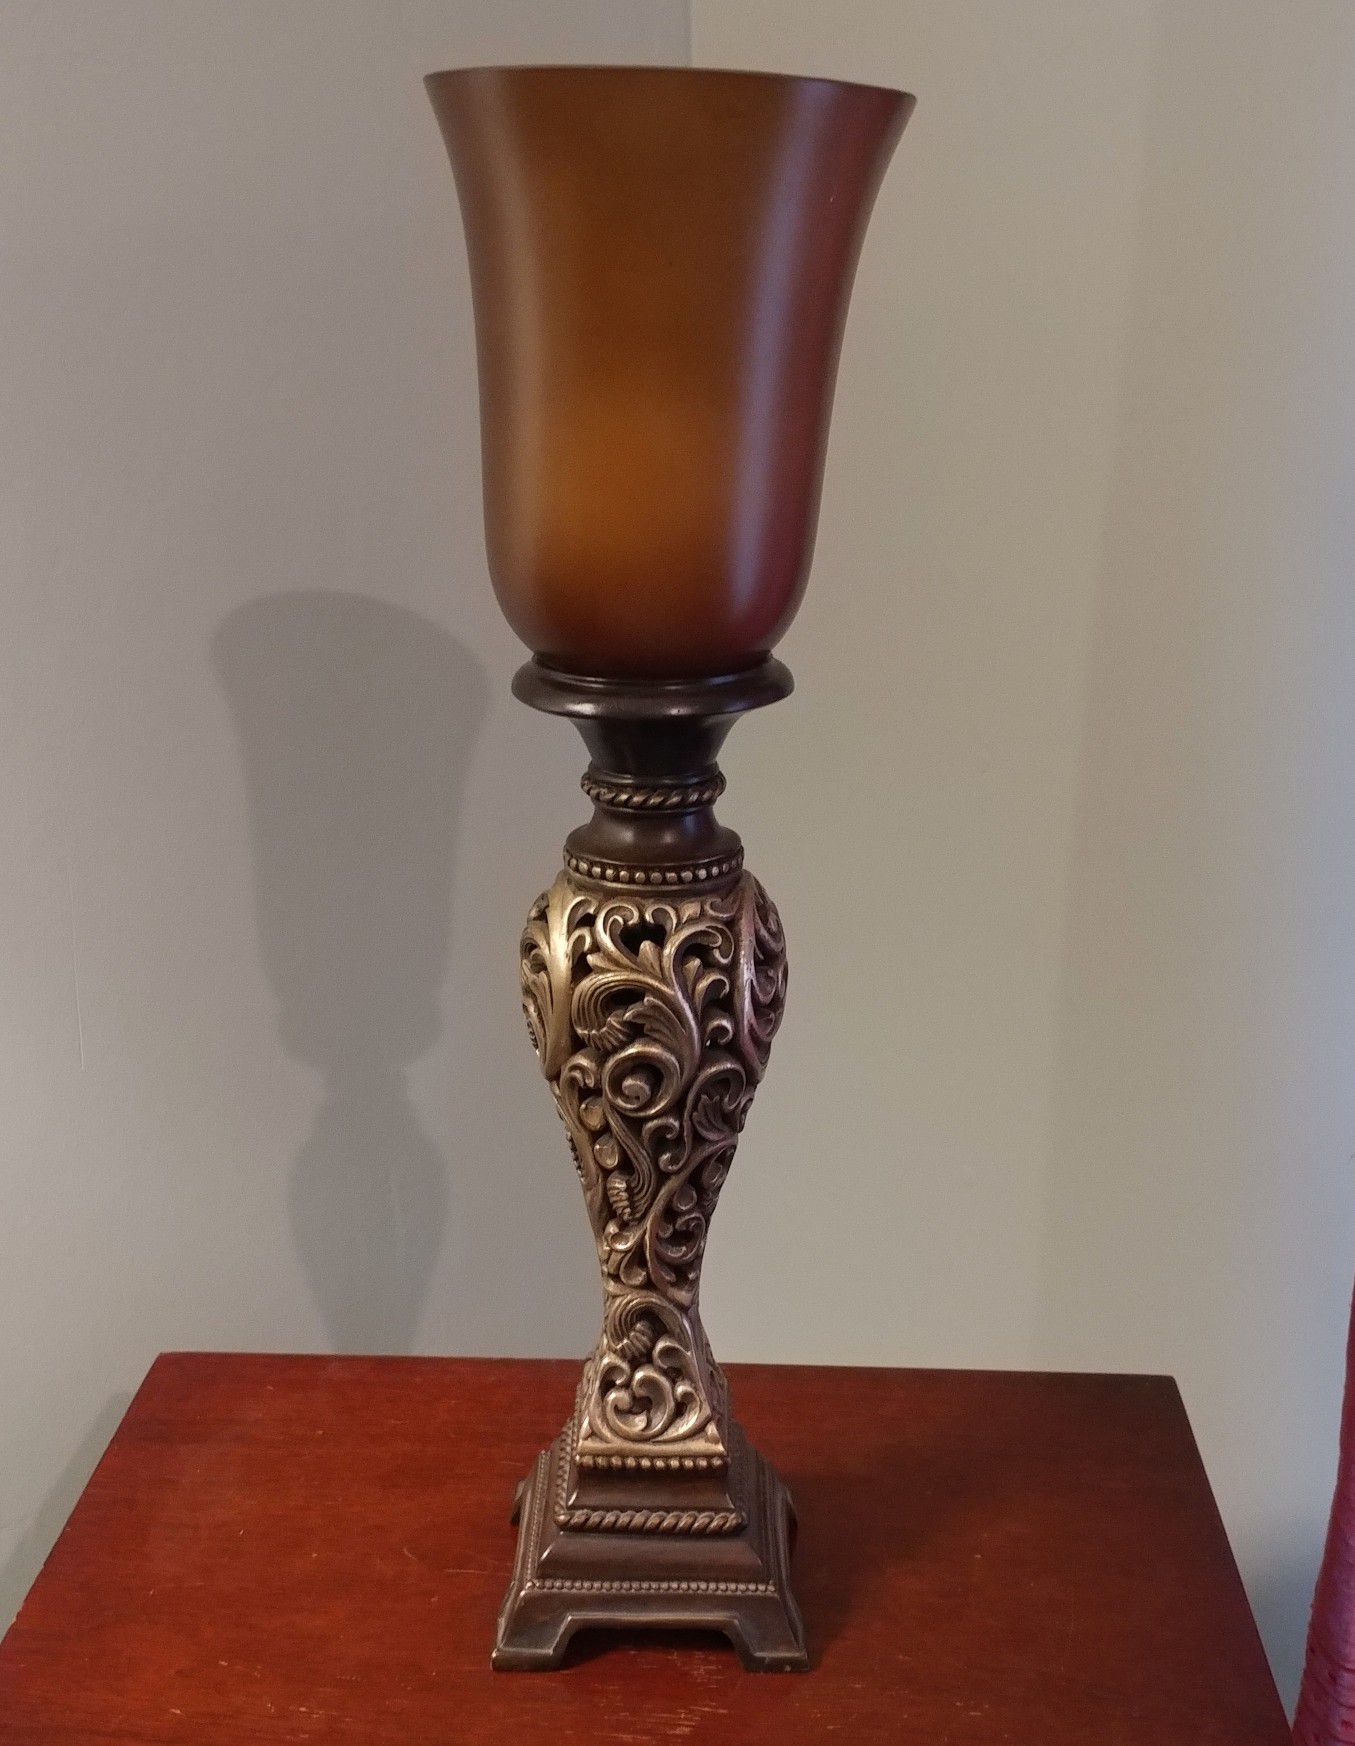 Ornate lamp, stands approx 23" high from base to shade top asking $25